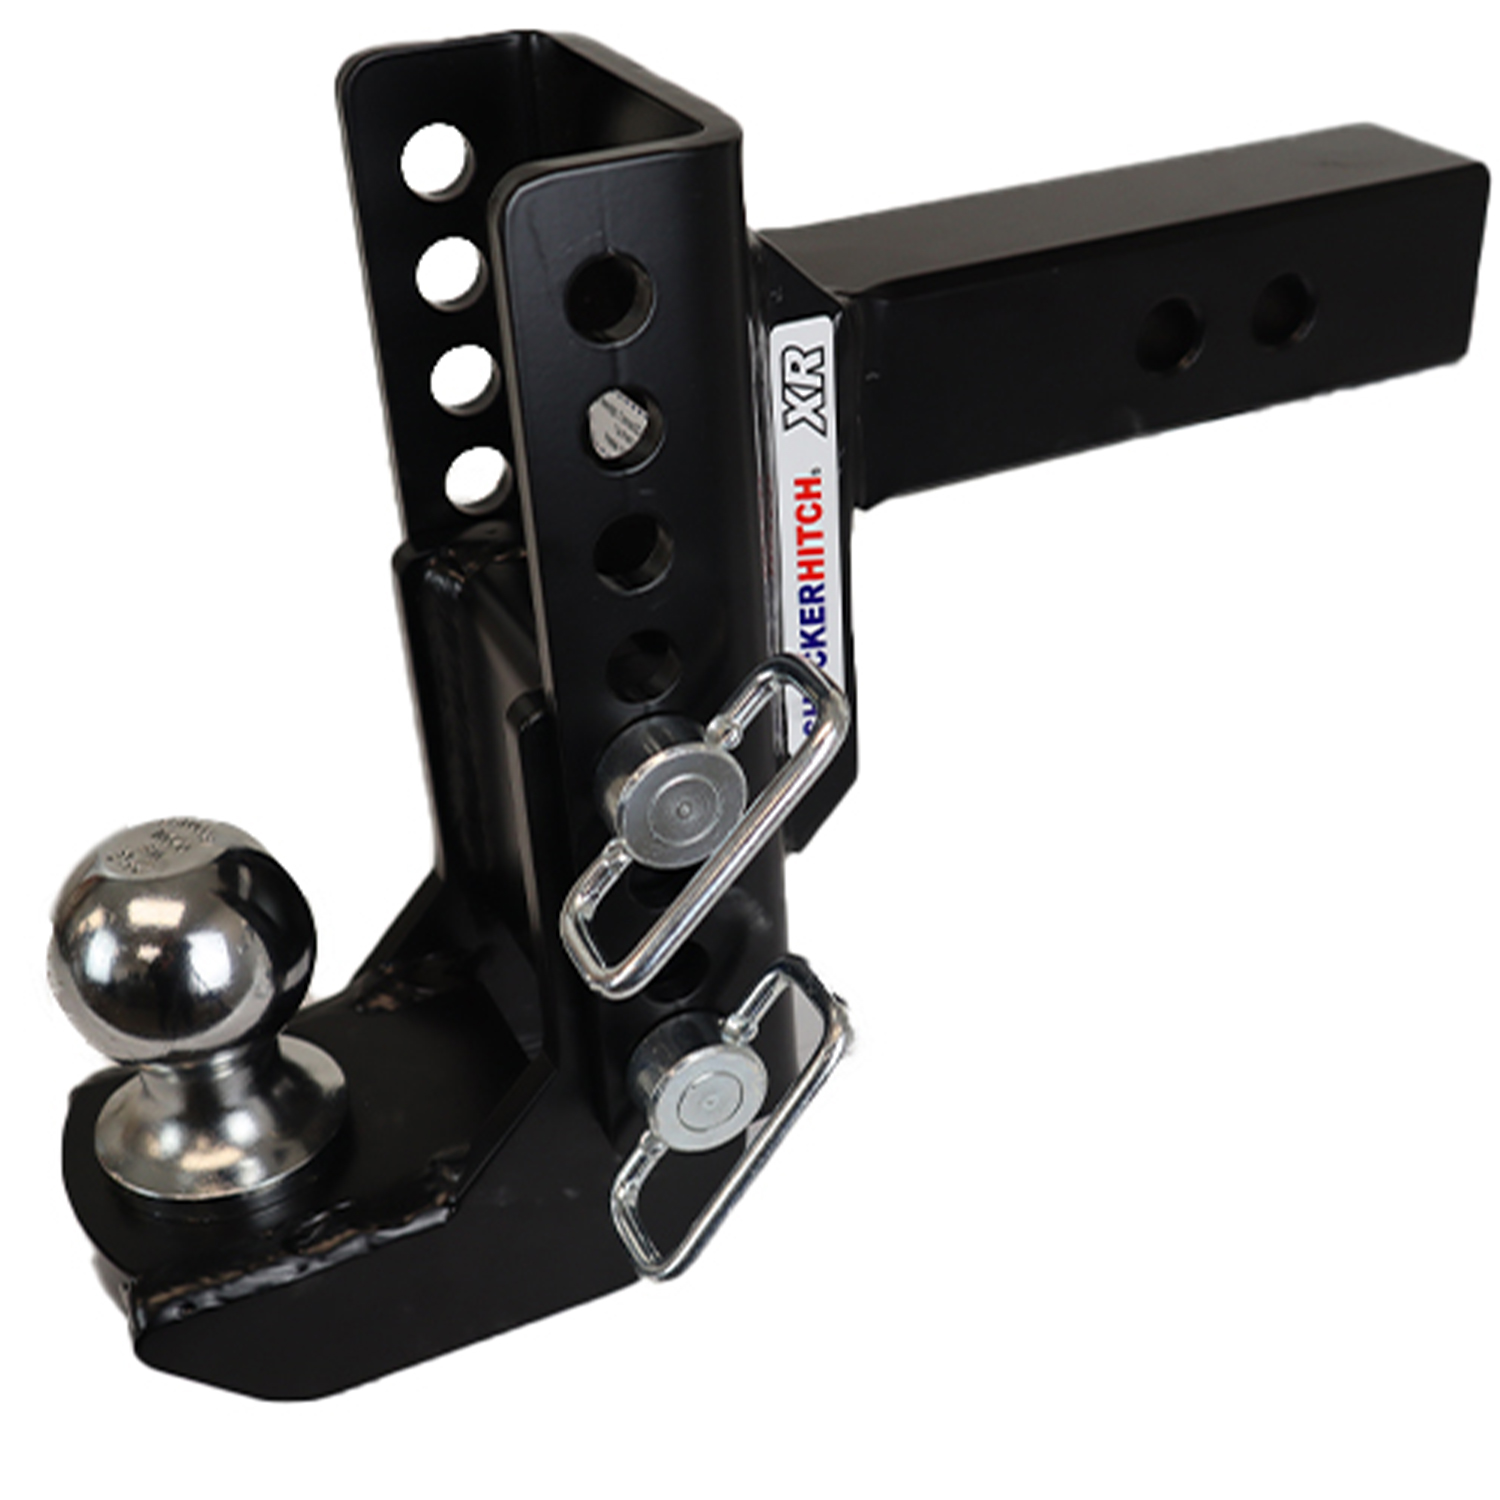 Shocker XR Adjustable Ball Mount Hitch (Build Your Own)